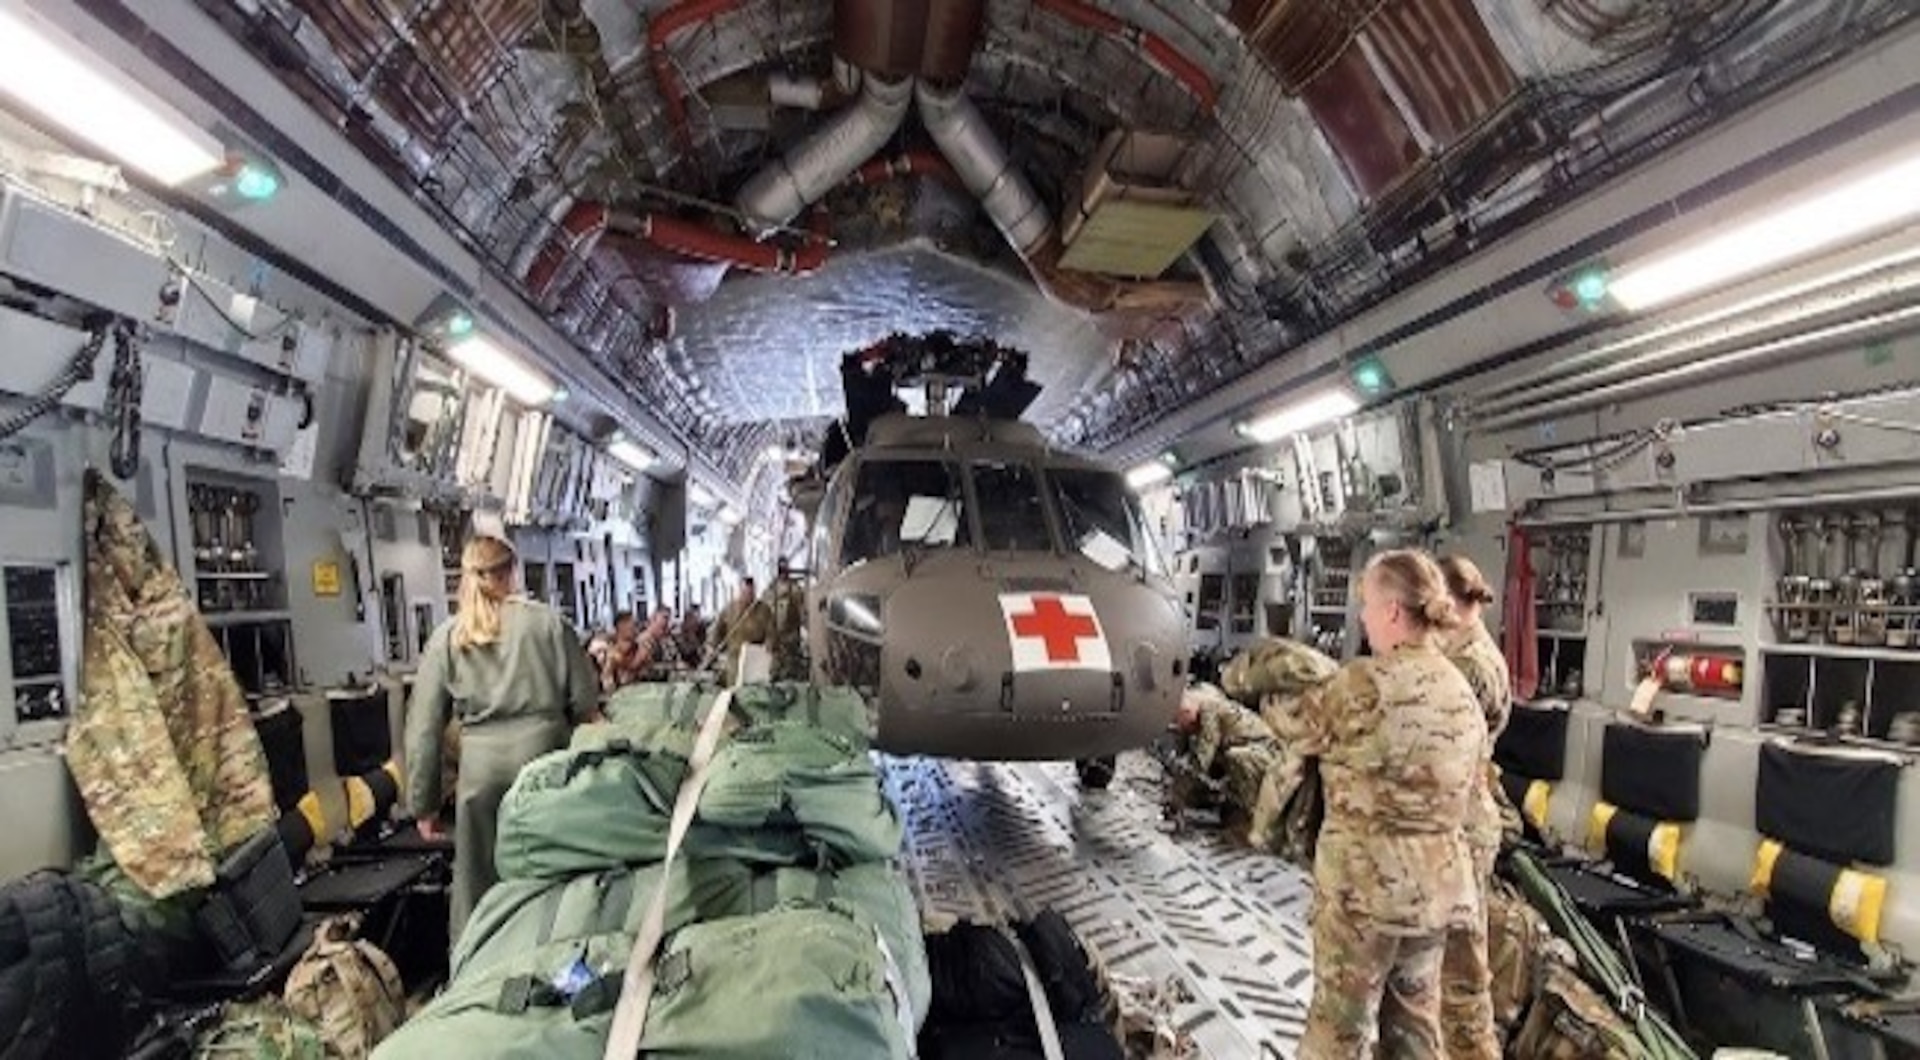 military transport helicopters interior